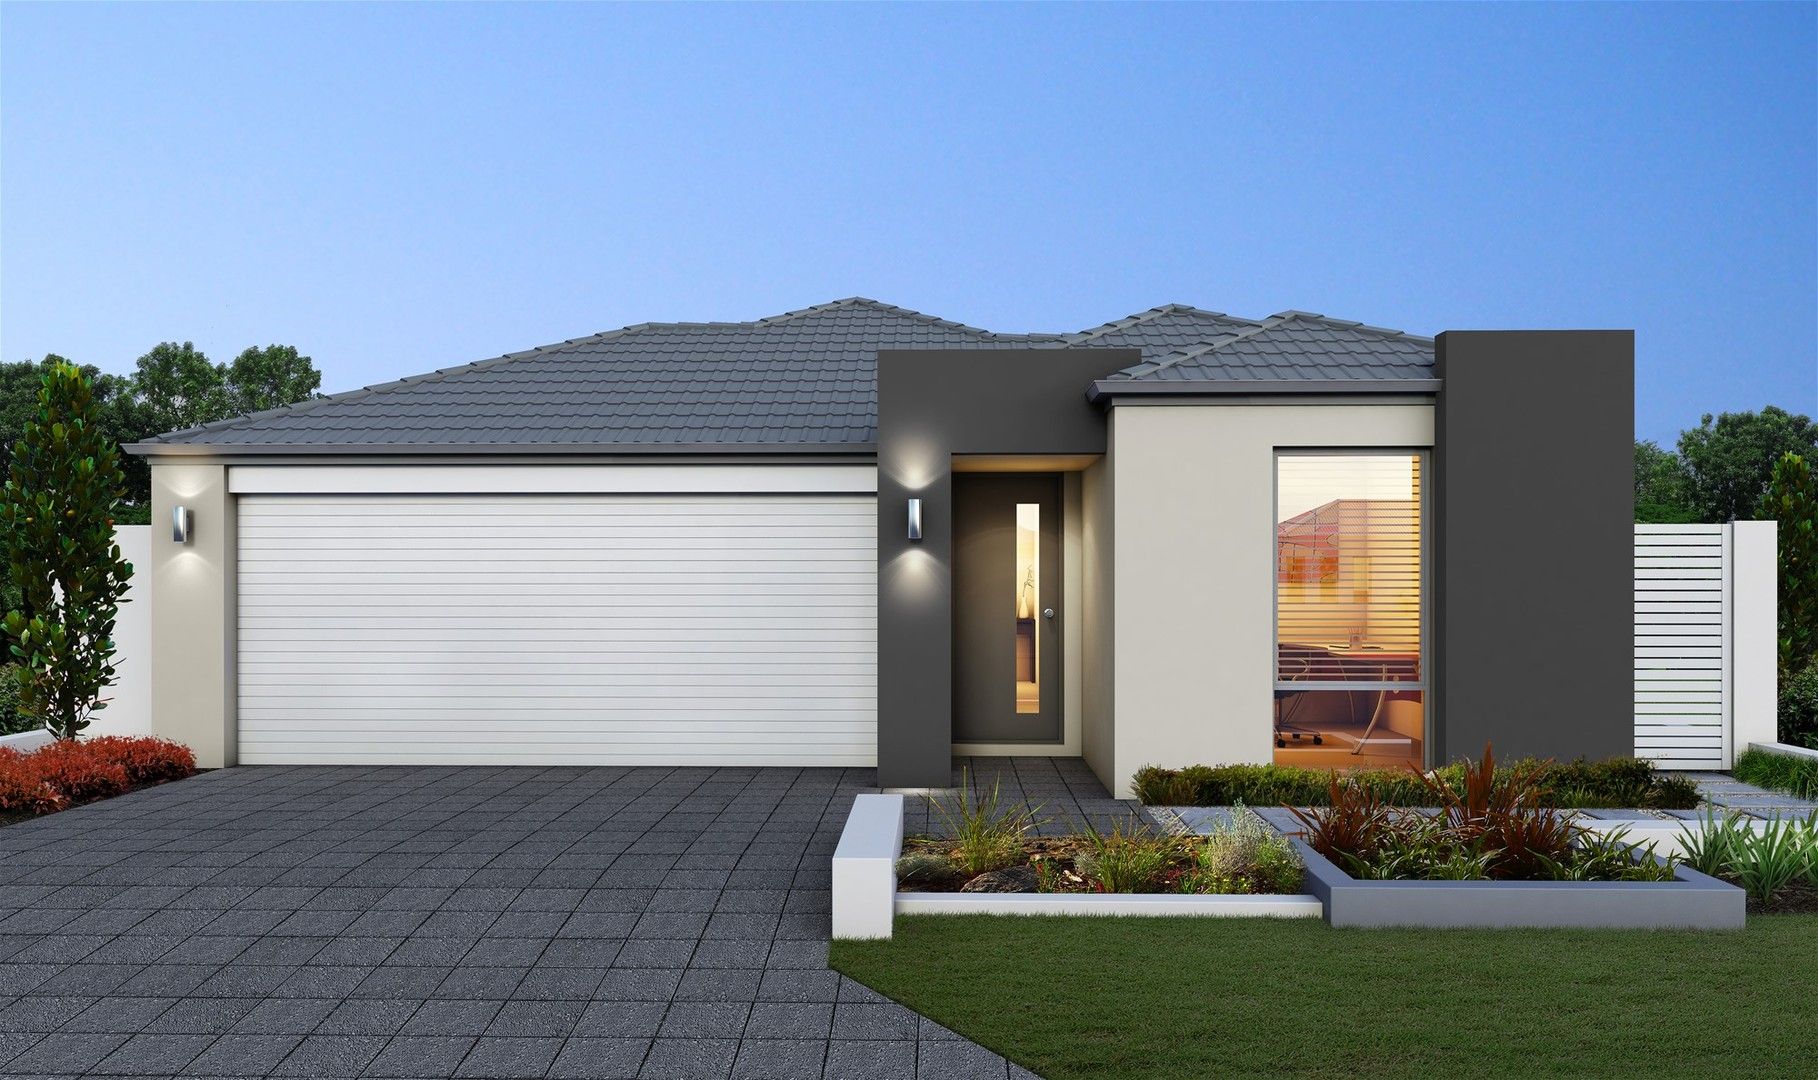 5 bedrooms New House & Land in Lot 461 Sase Frontage SOUTH YUNDERUP WA, 6208